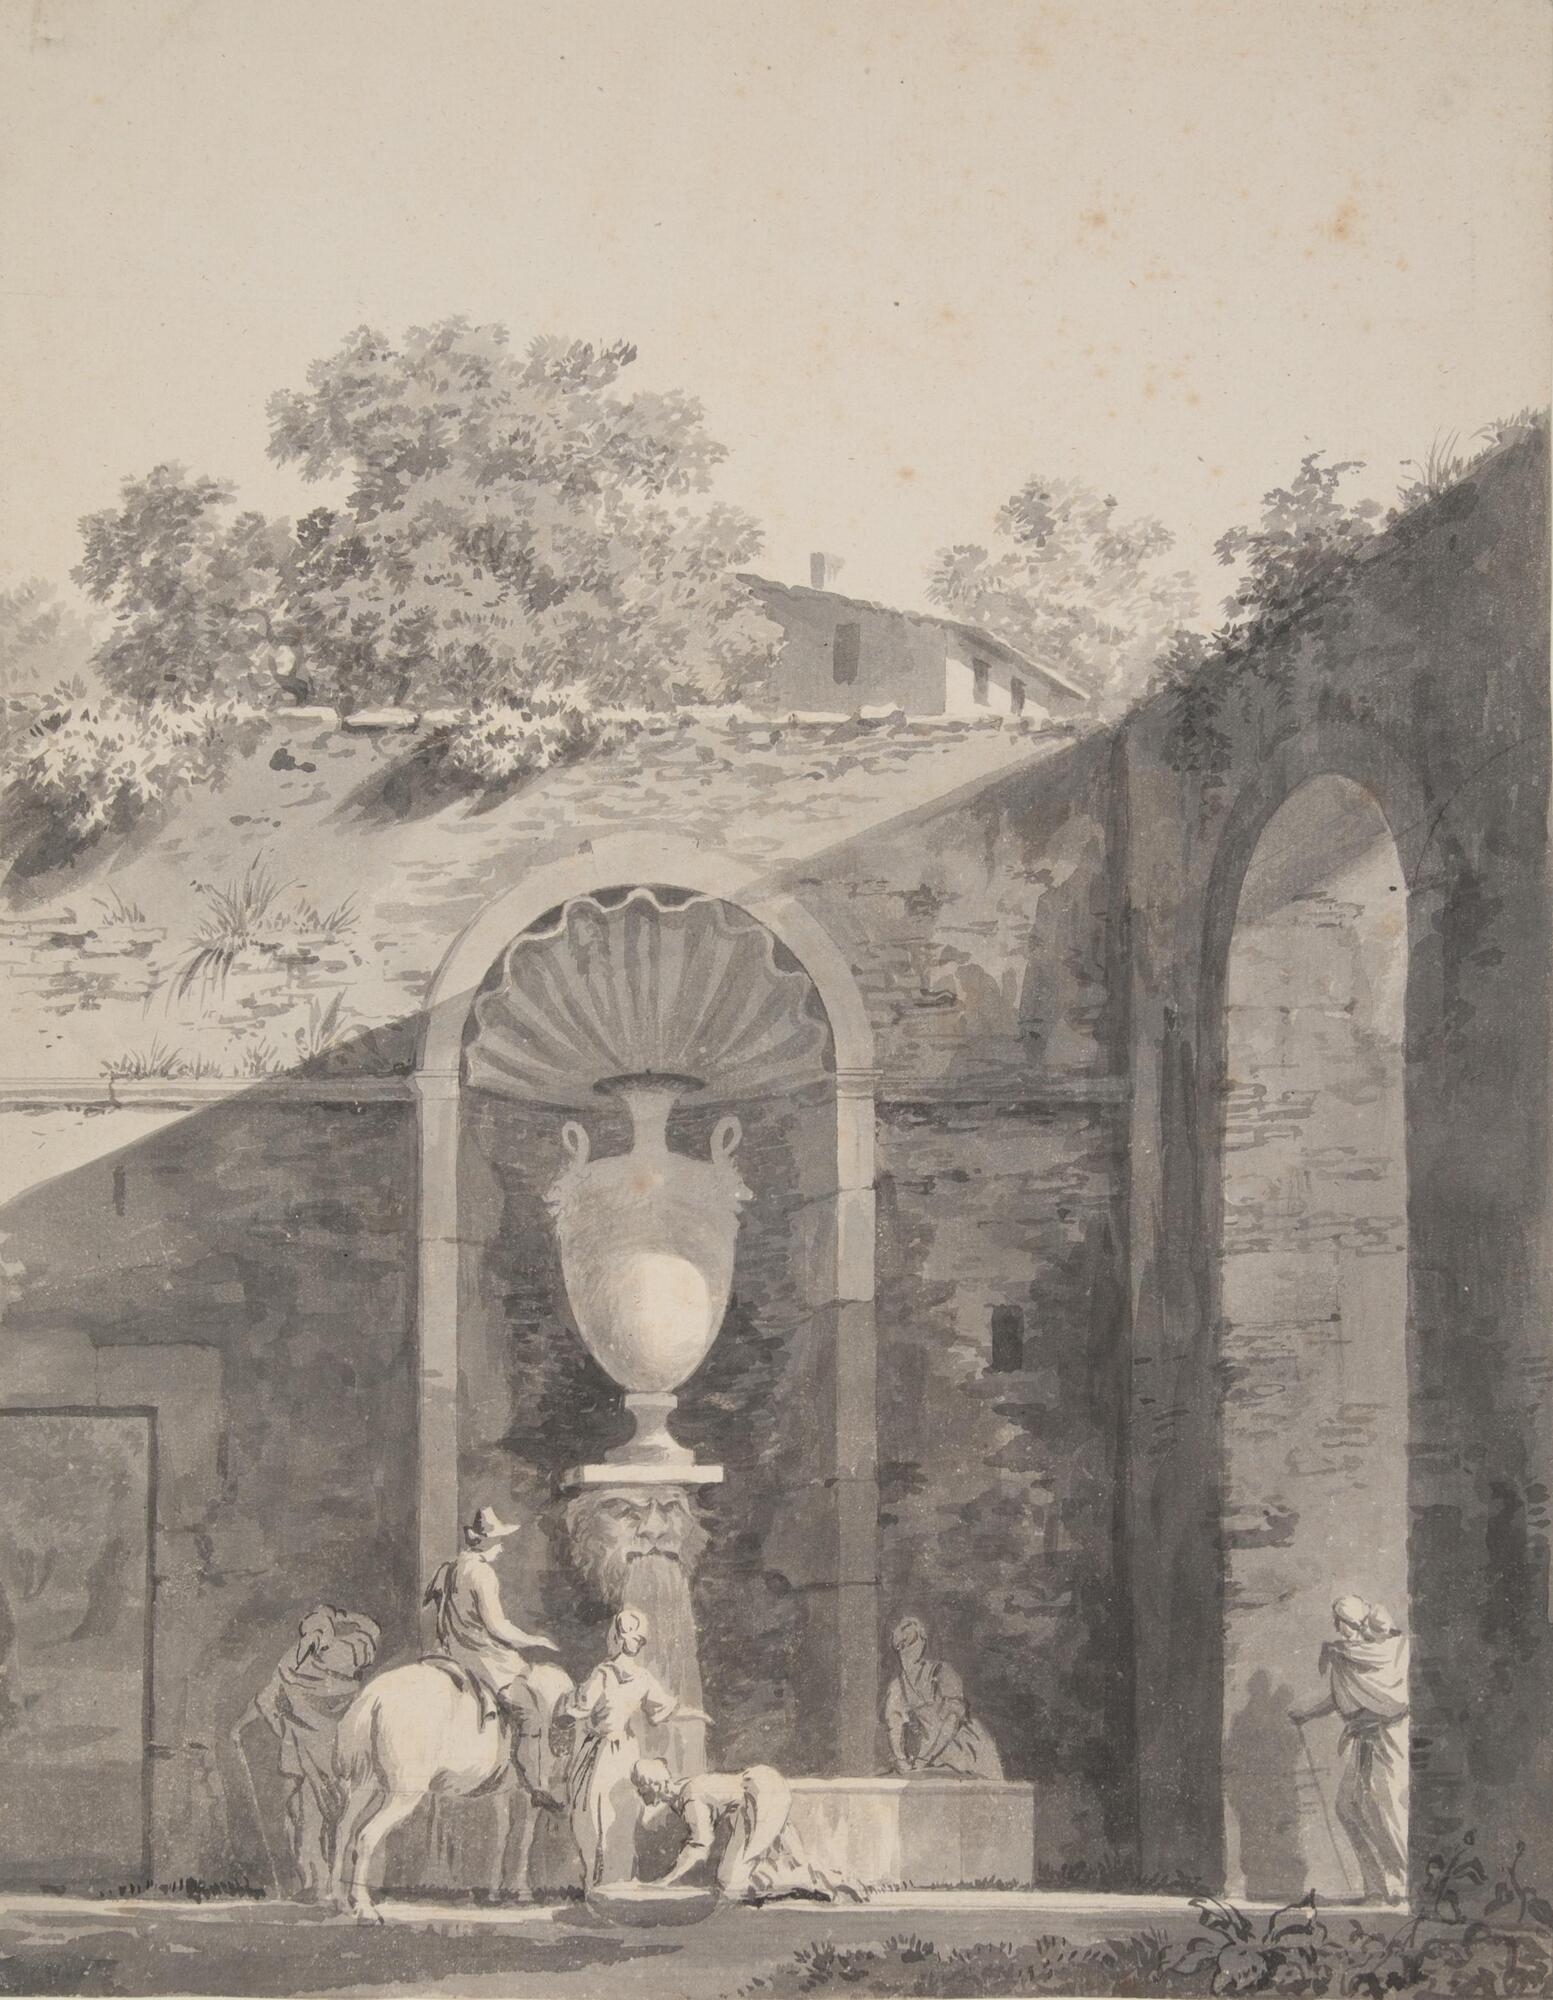 An outdoor scene of a man next to a stone fountain, with a man on a horse and various other people around. The fountain has an arched top and is part of a stone wall with other rounded arched openings. There is a decoration of an ornate handled urn. There is also a fleur-de-lis watermark.